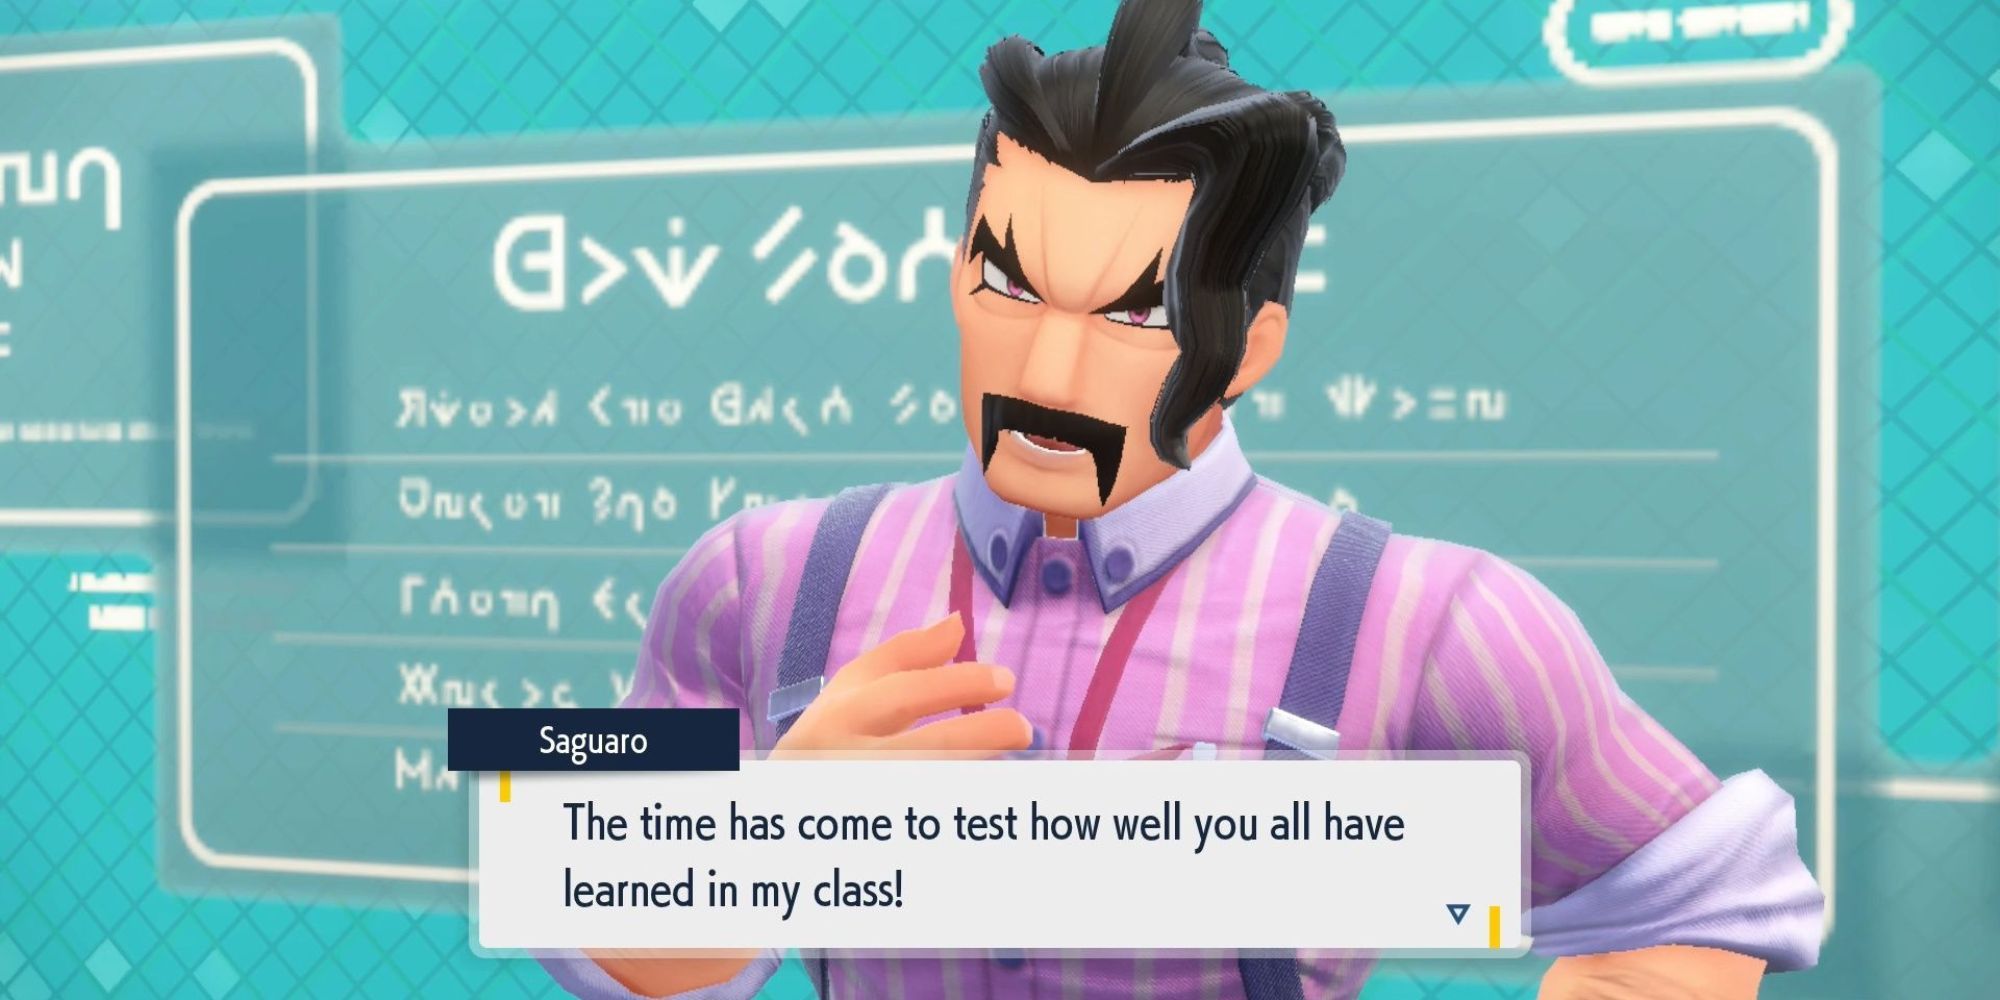 Saguaro talking to the class in Pokemon Scarlet and Violet